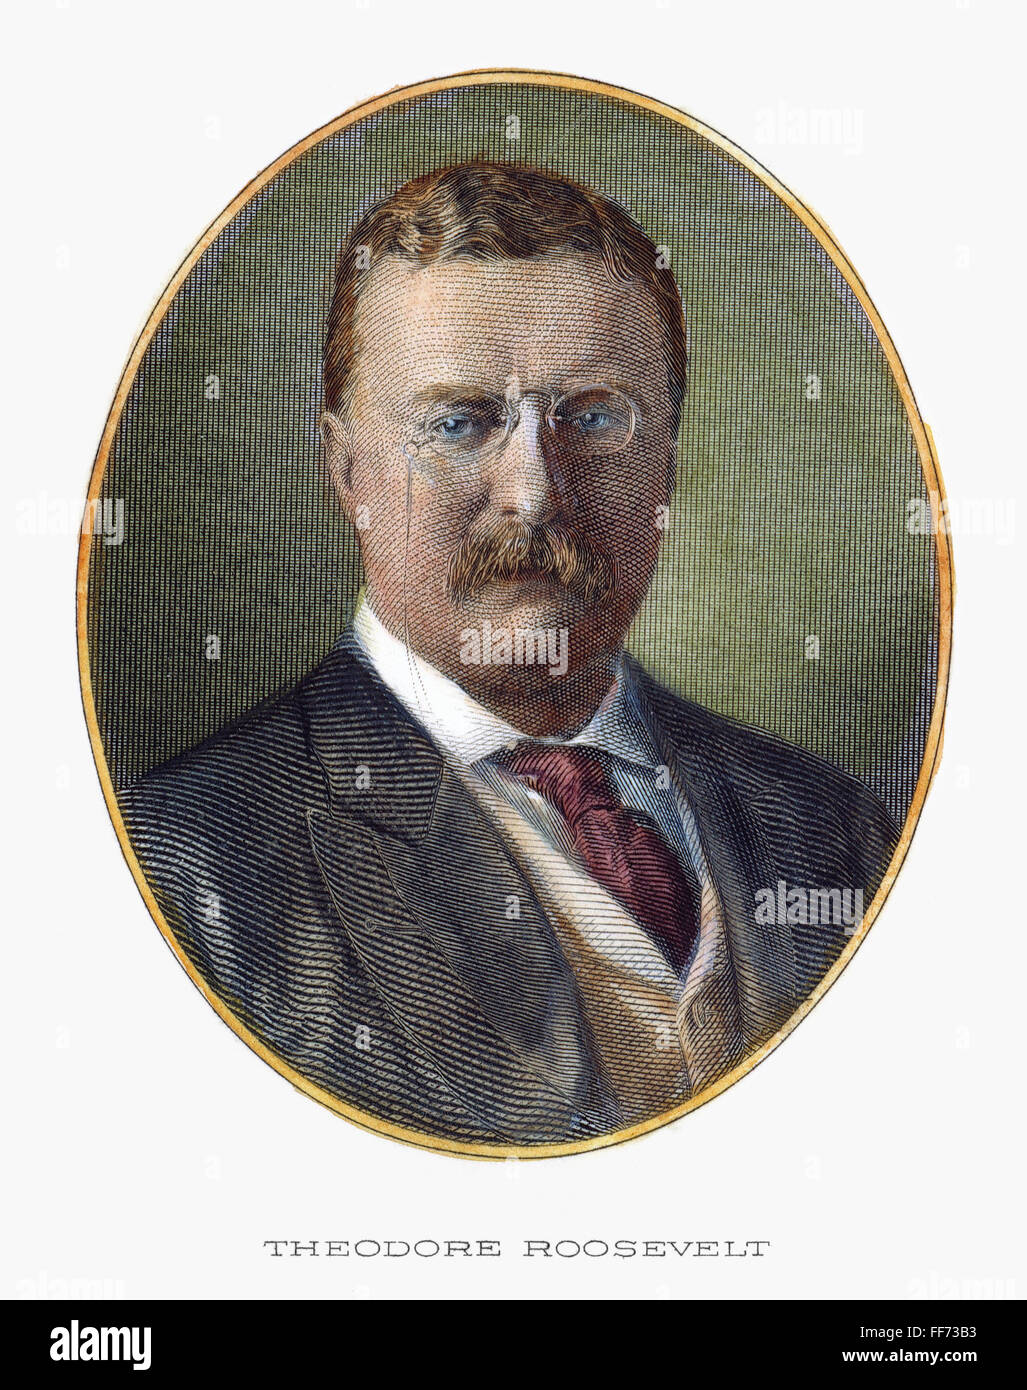 THEODORE ROOSEVELT /n(1858-1919): contemporary steel engraving. Stock Photo